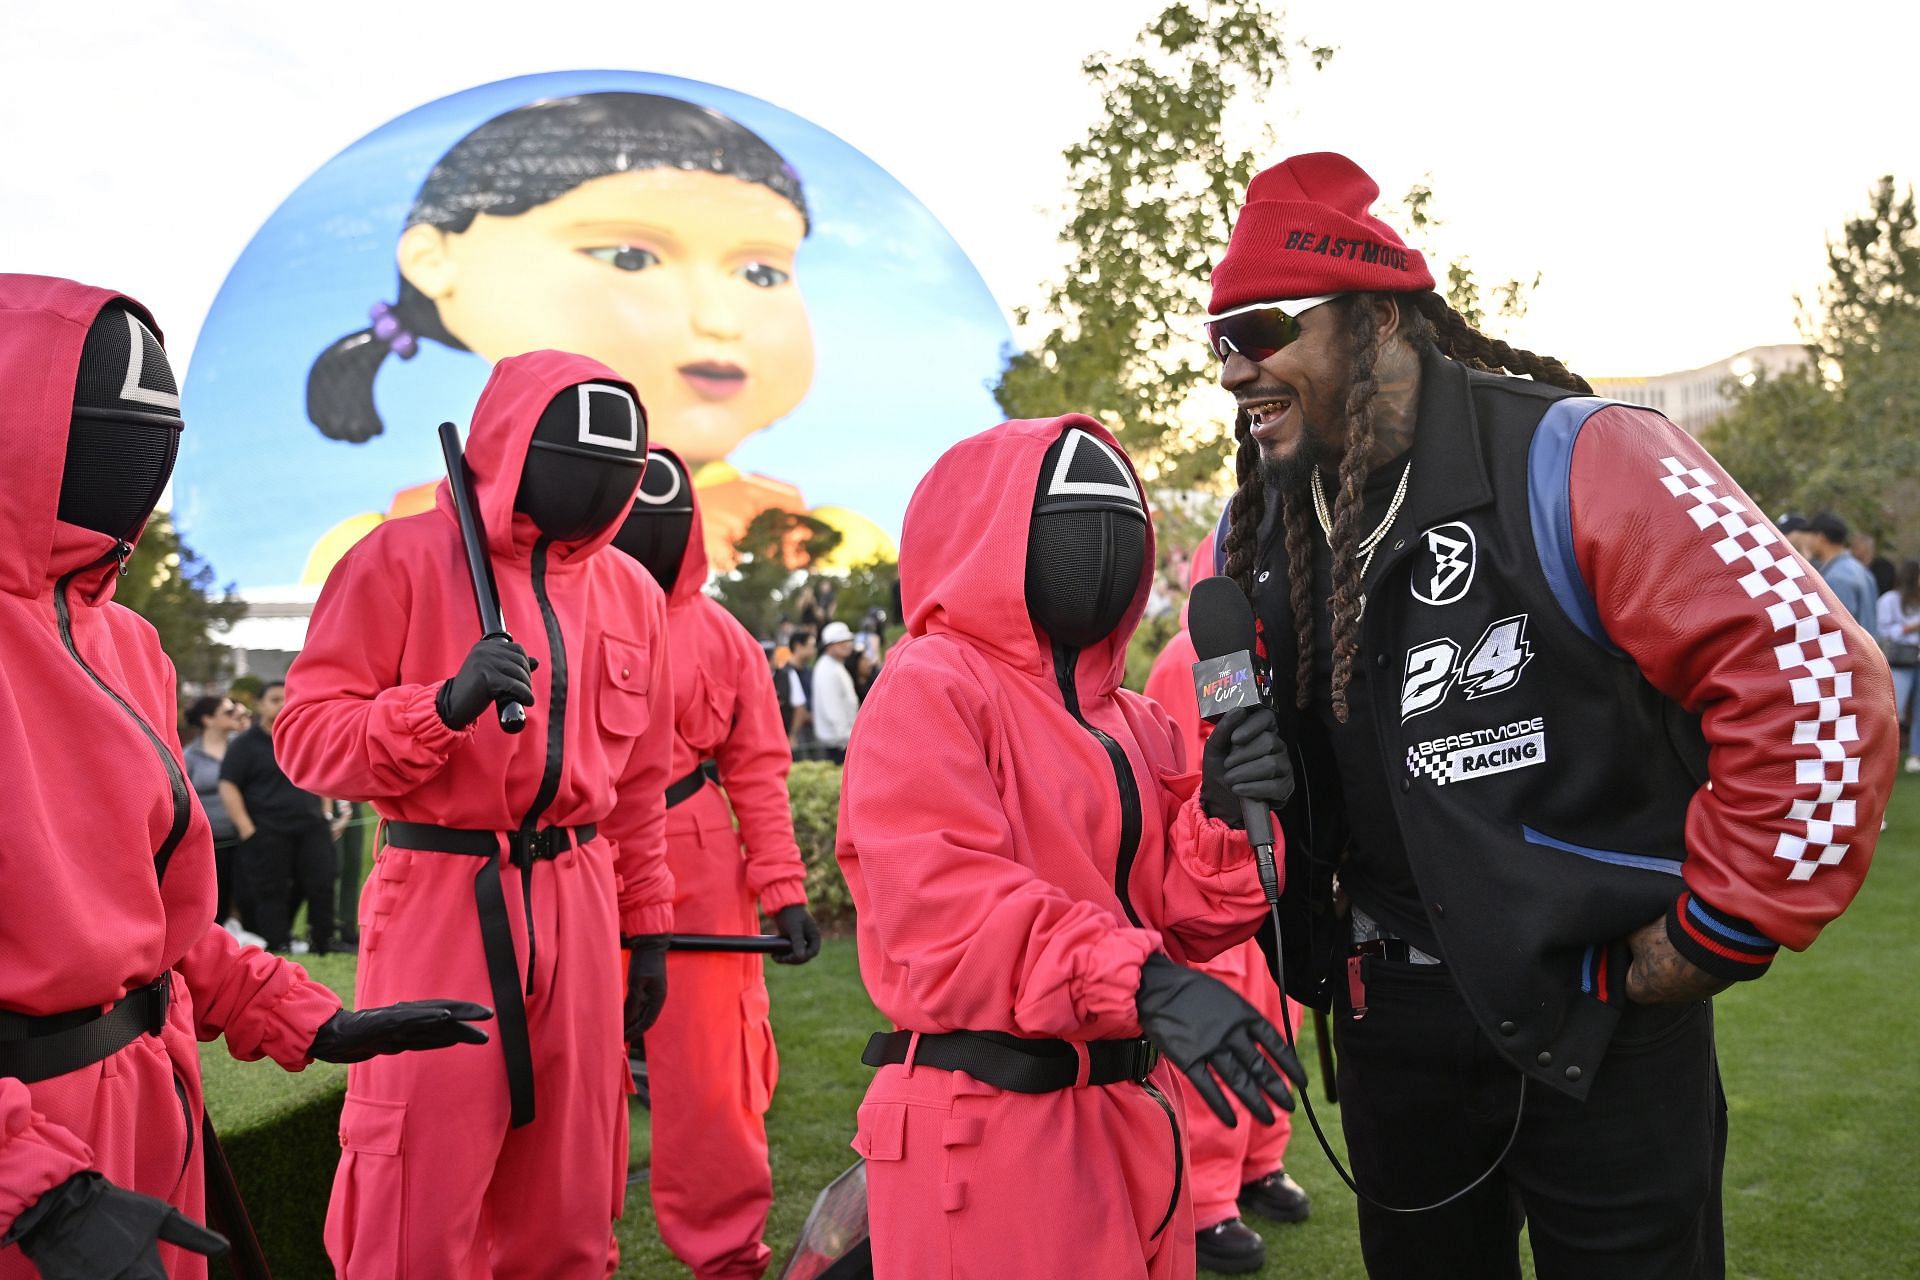 Marshawn Lynch at The Netflix Cup (Image via Getty)